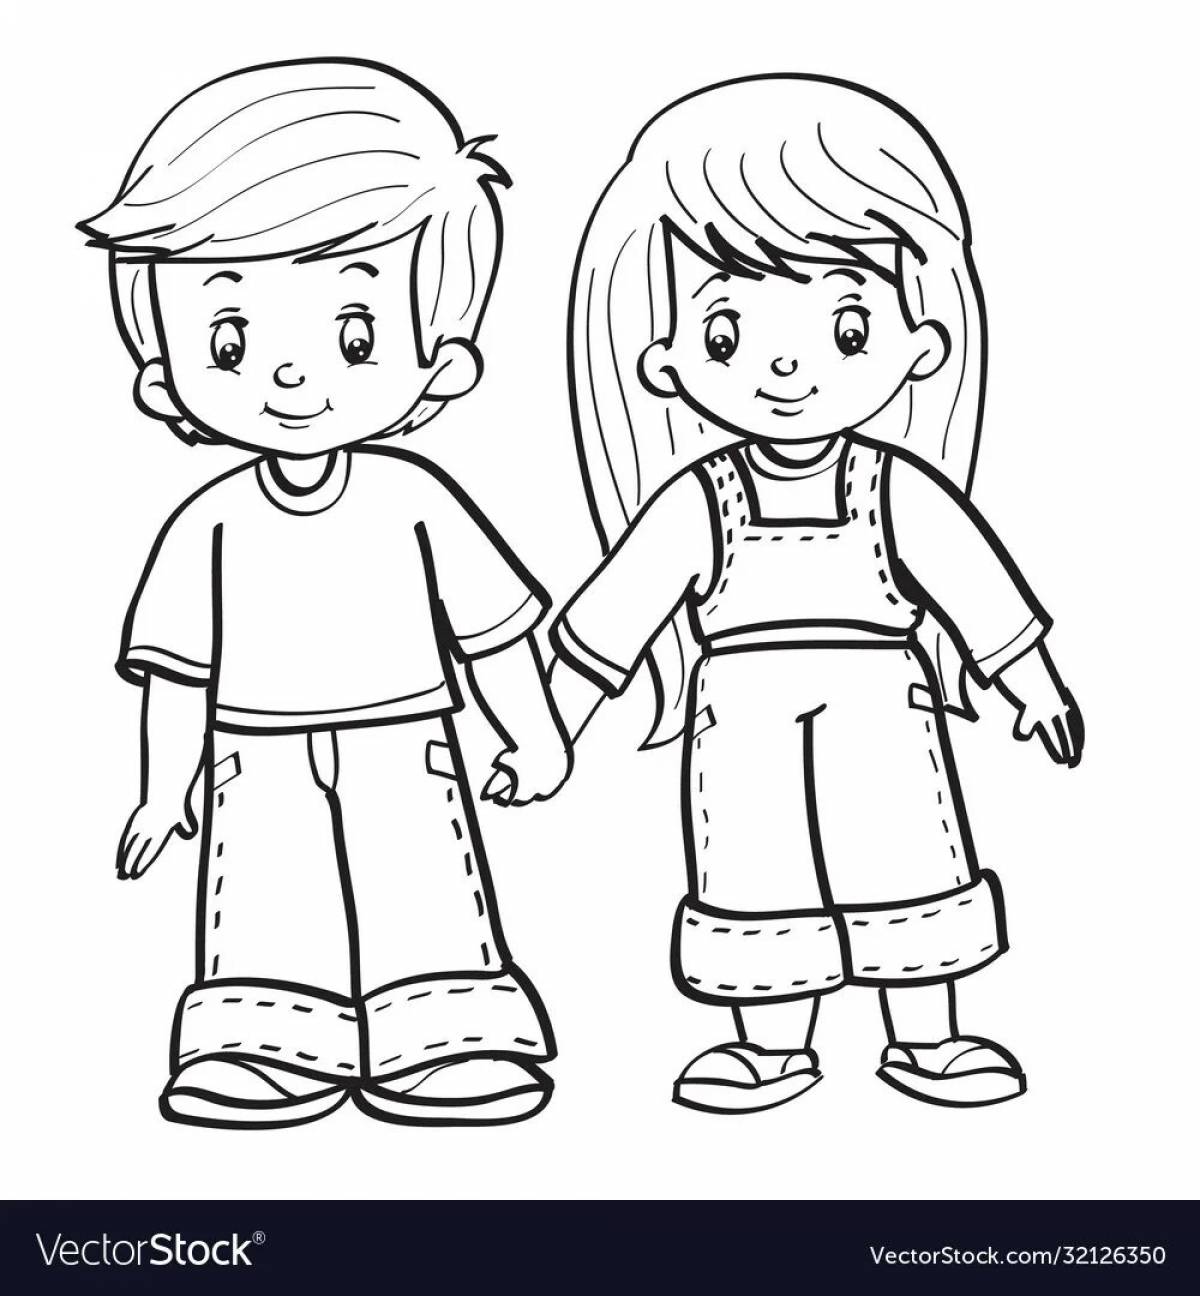 Boy and girl for kids #11